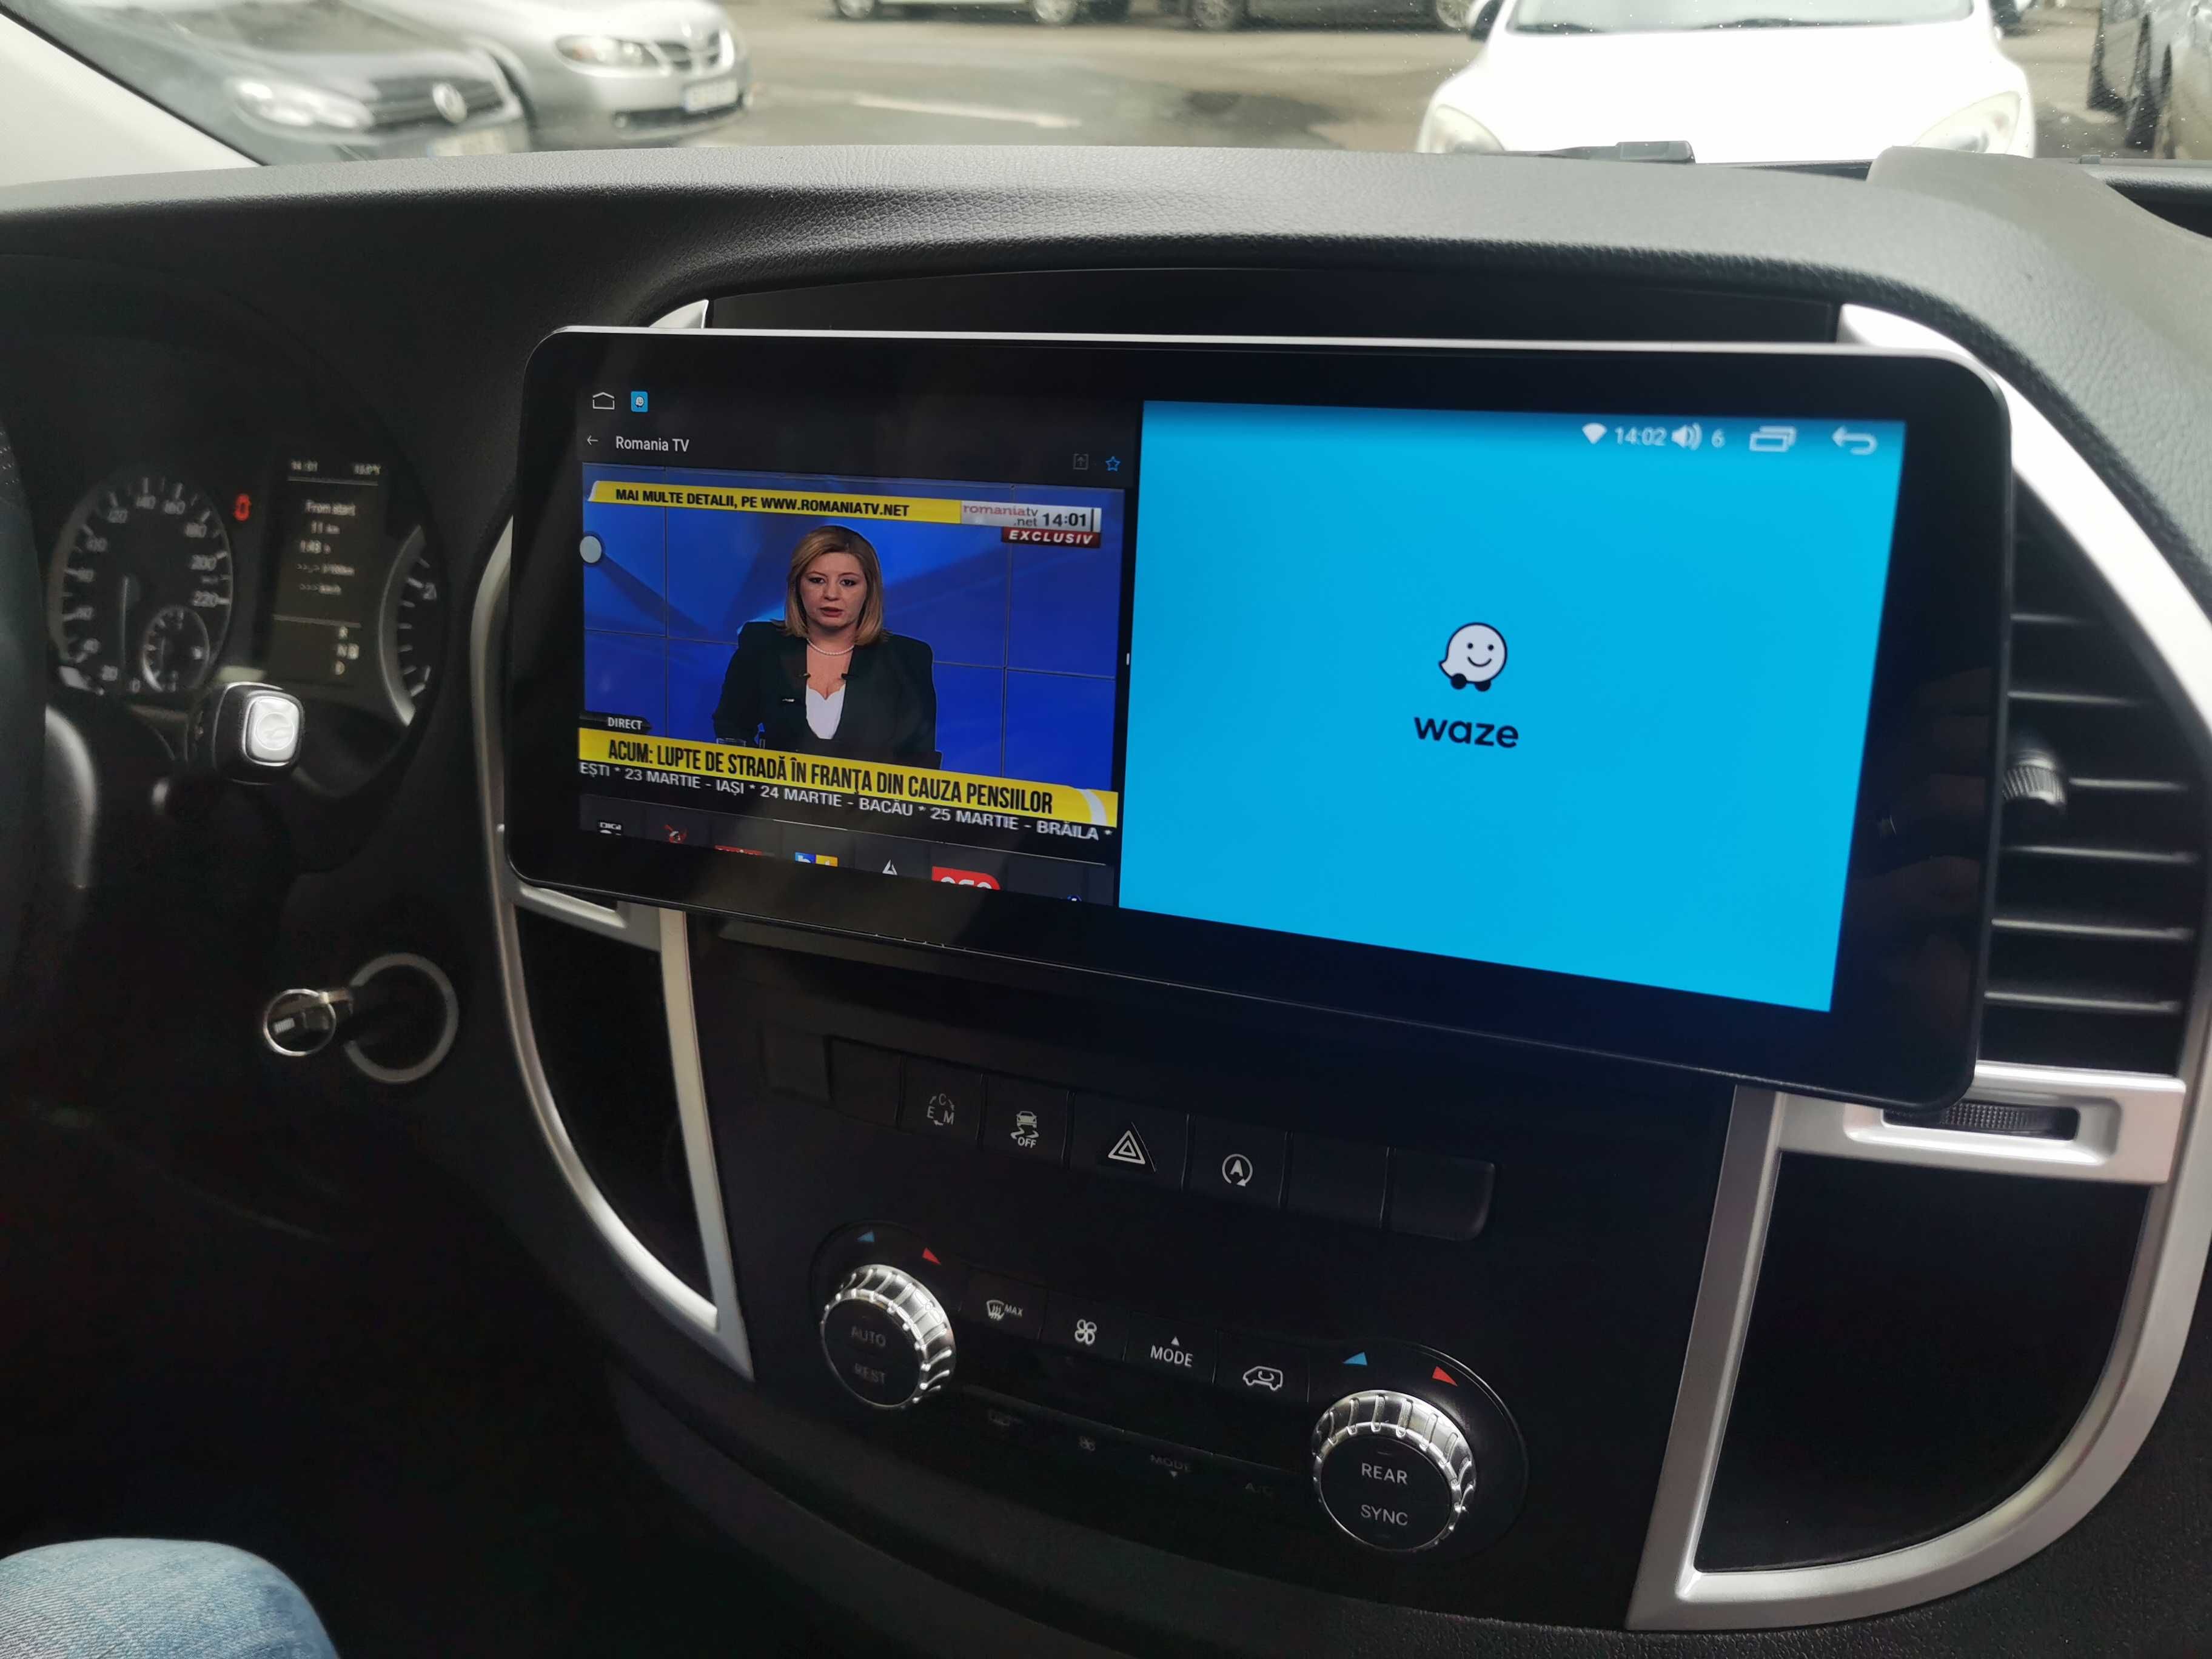 Navigatie Android Mercedes Vito 2014-2020 octacore 12,3inch